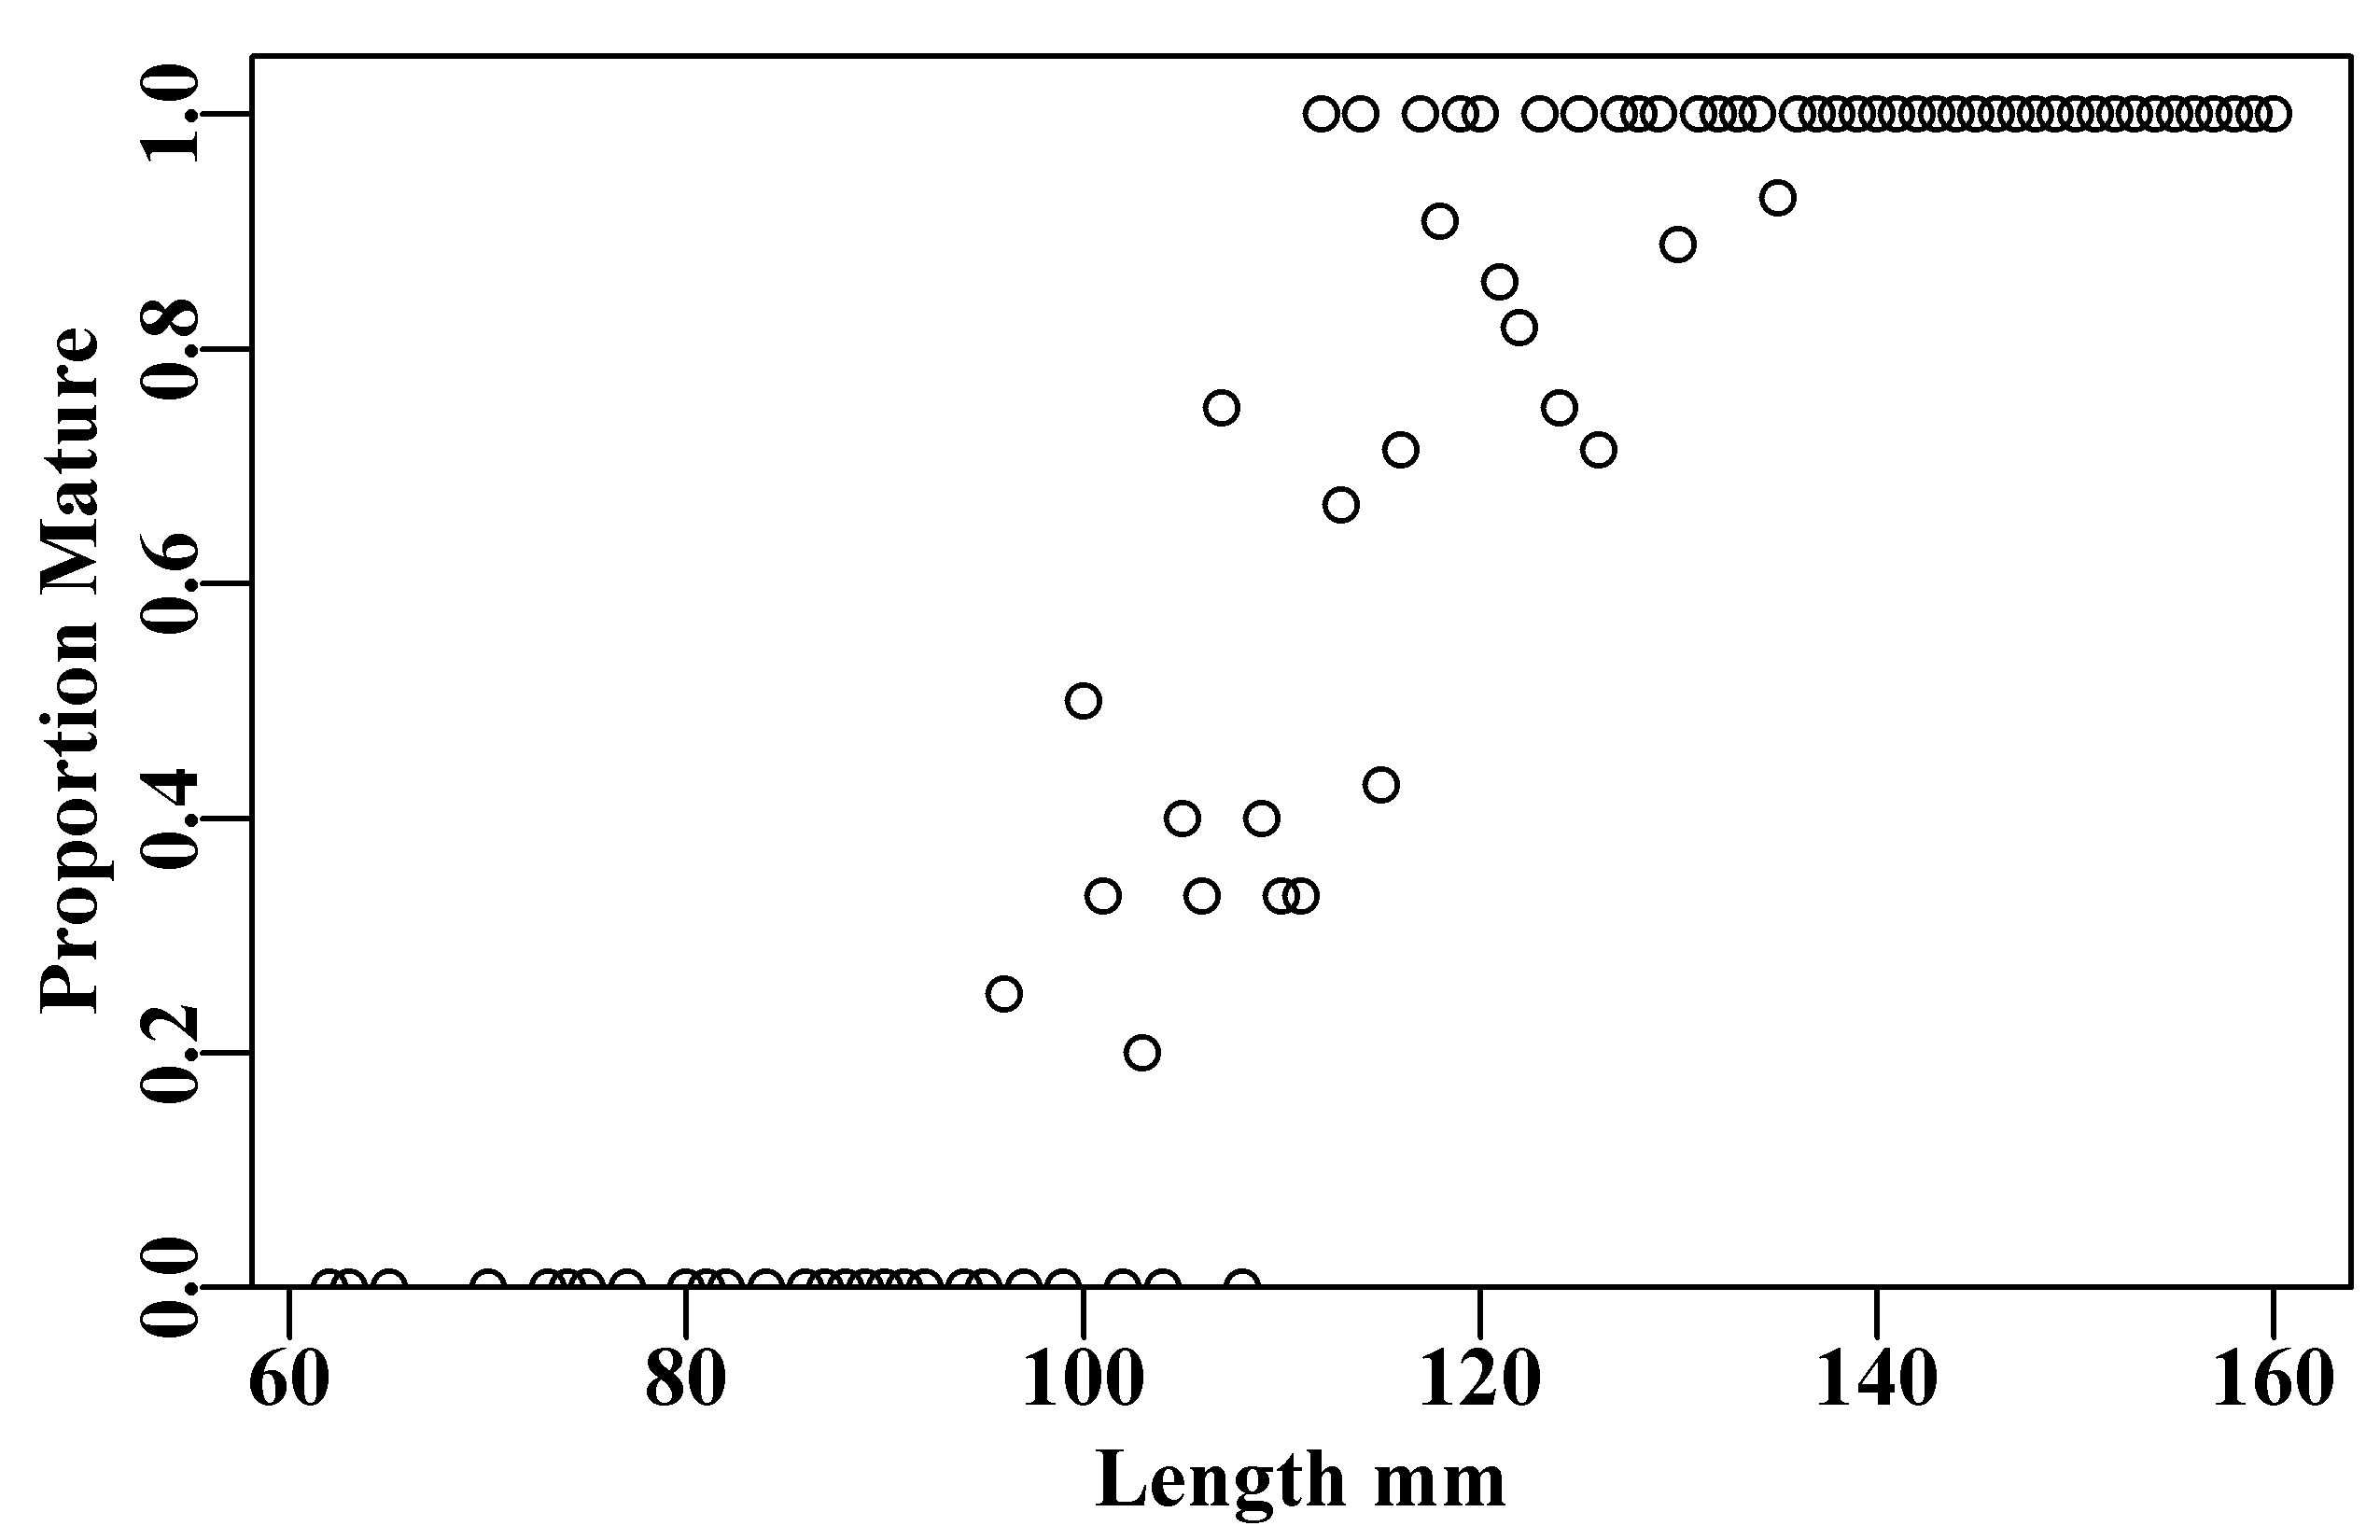 The proportion mature at length for the blacklip abalone maturity data in the tasab data set.